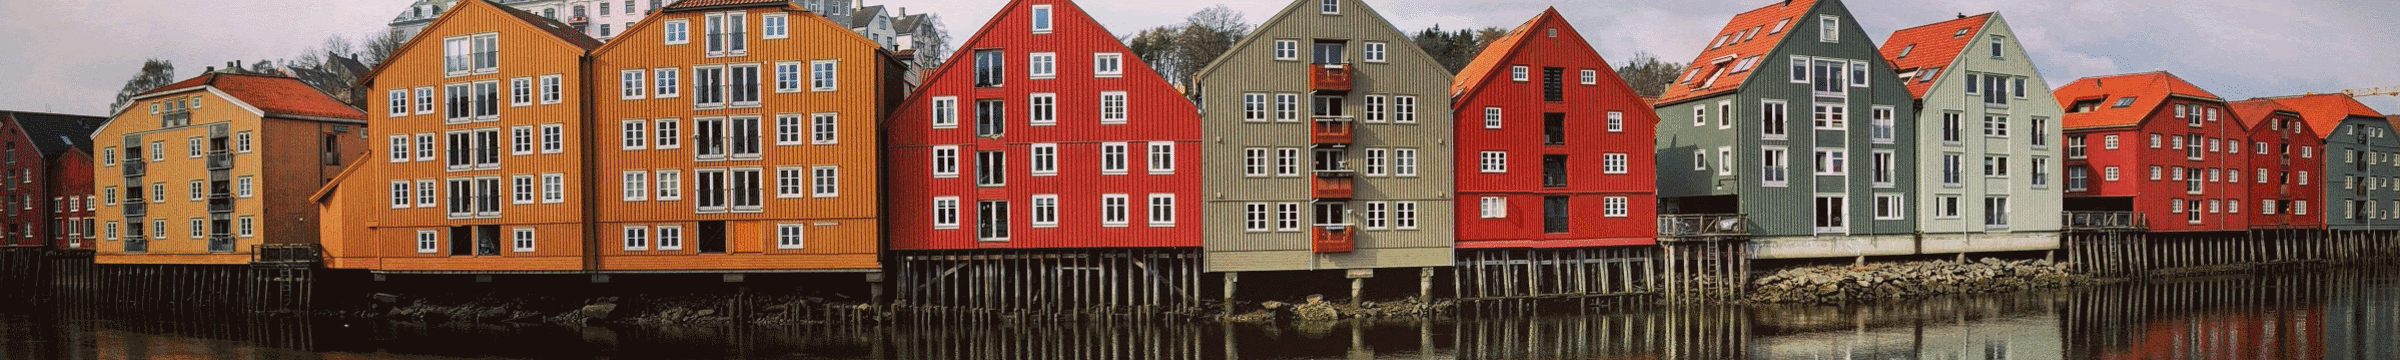 Coloured houses on river 